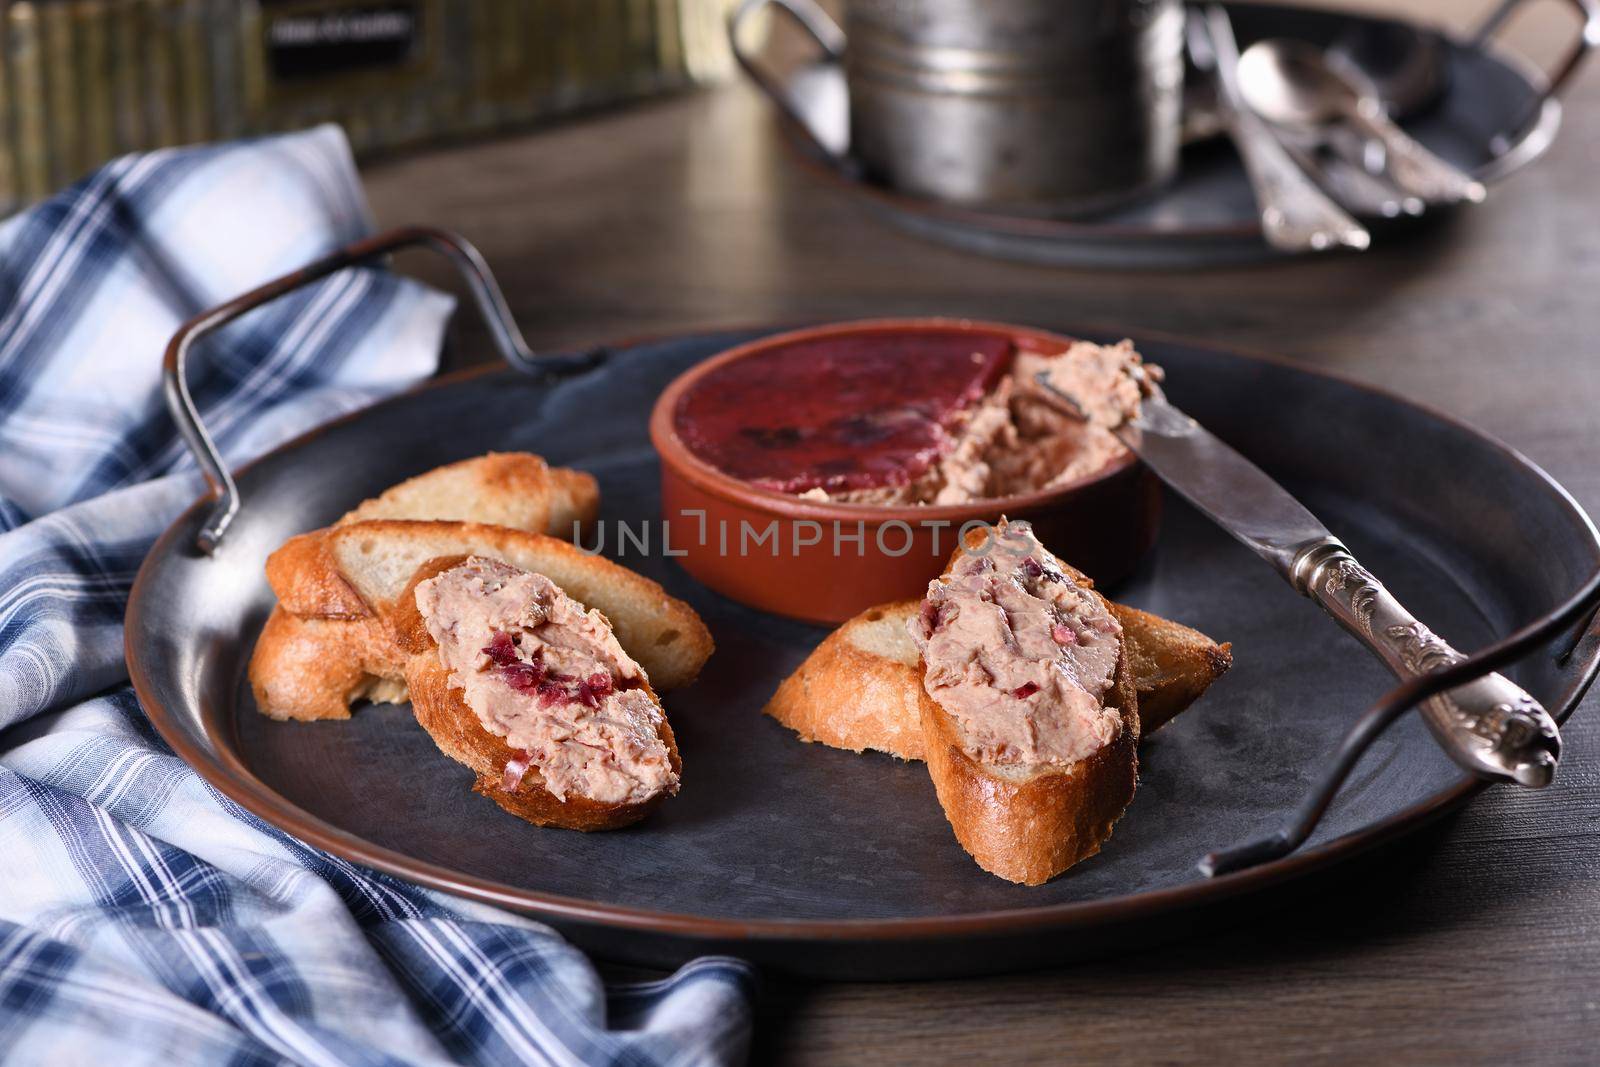  Delicate chicken pate with mashed cranberries spread on toasted baguette slices. Country style food.